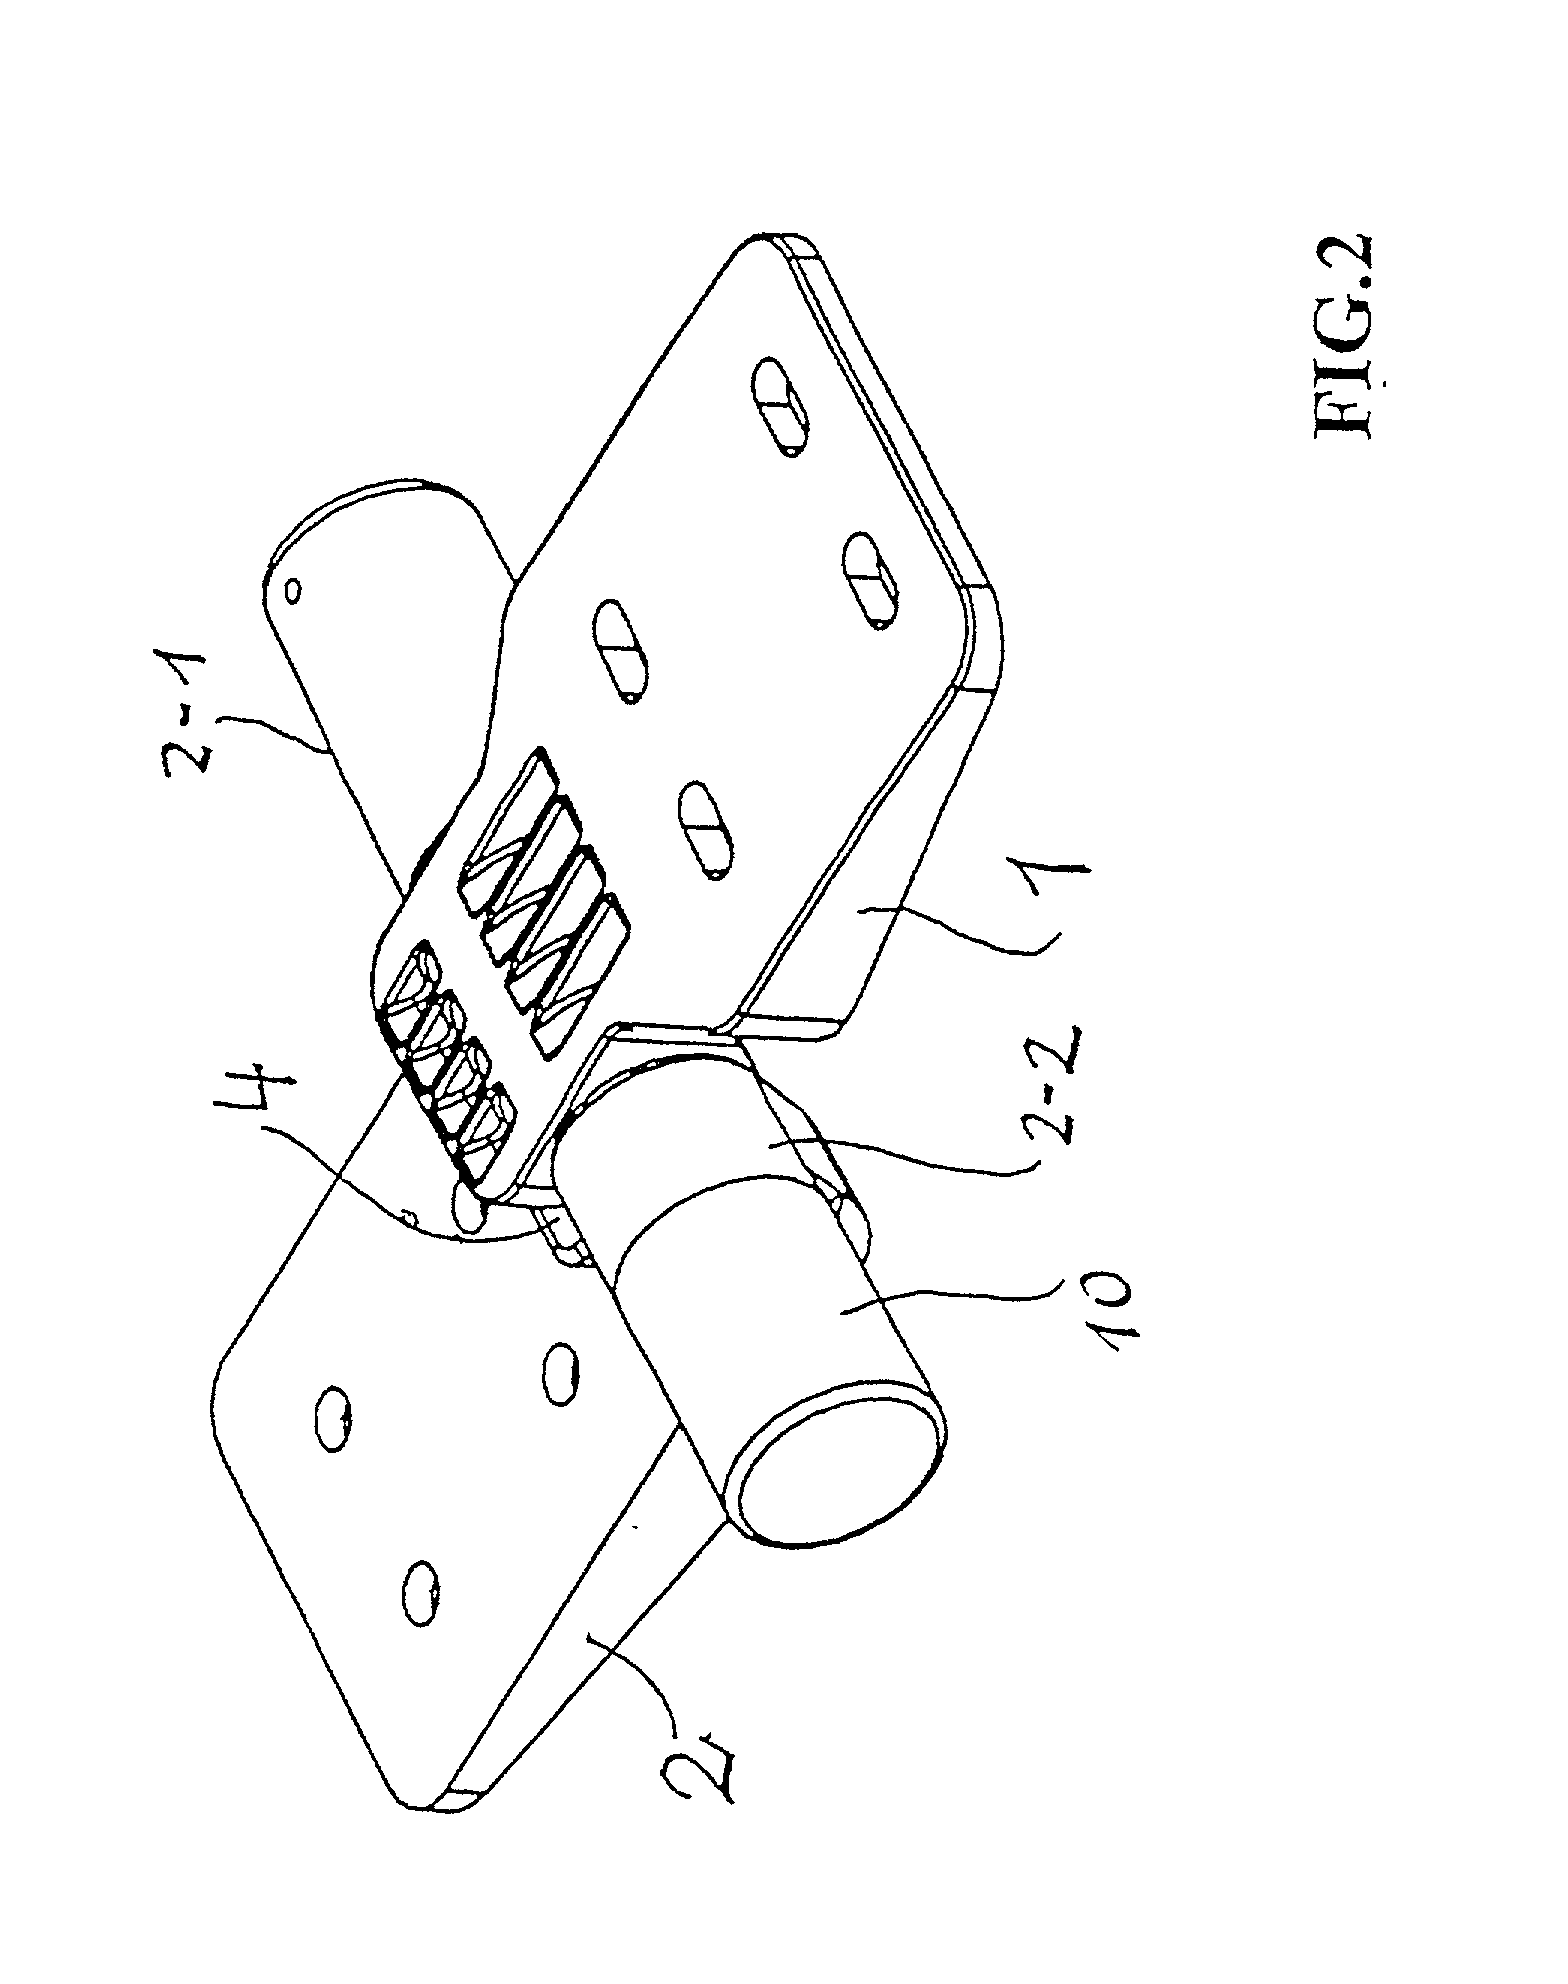 Spring-loaded hinge and damping arrangement, specifically for a spring-loaded hinge